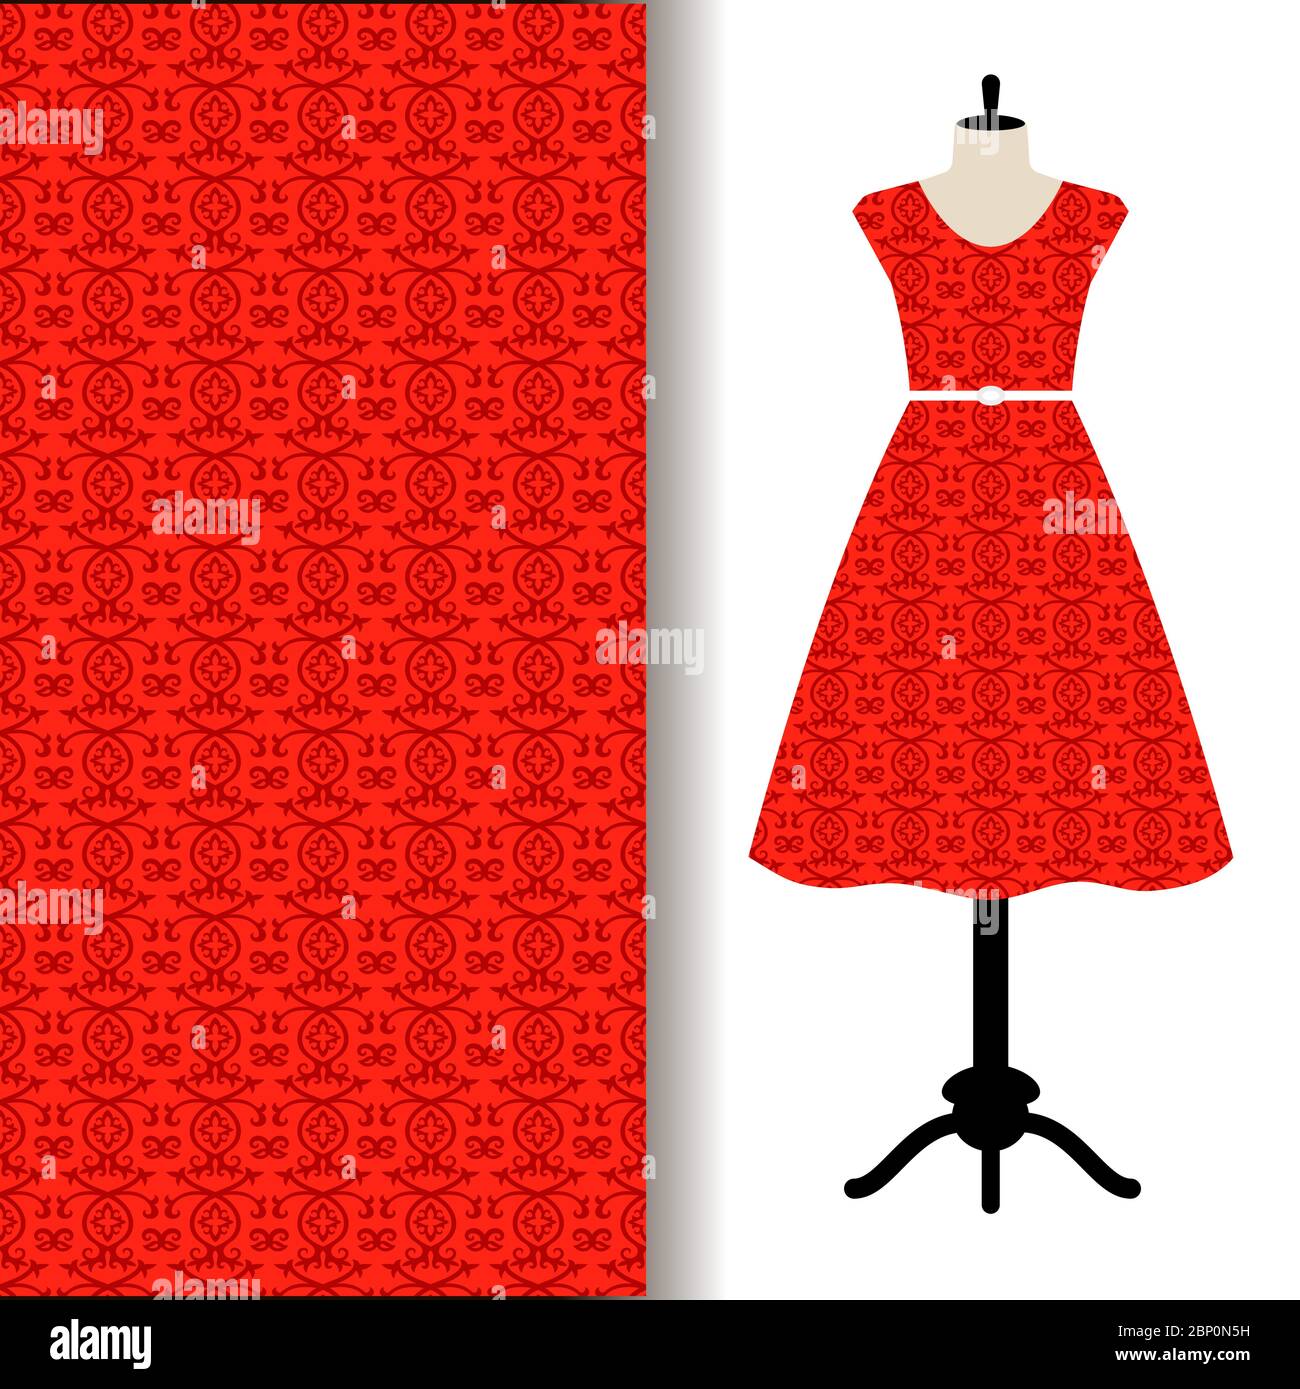 Womens dress fabric pattern design with red traditional arabic pattern, Vector illustration Stock Vector